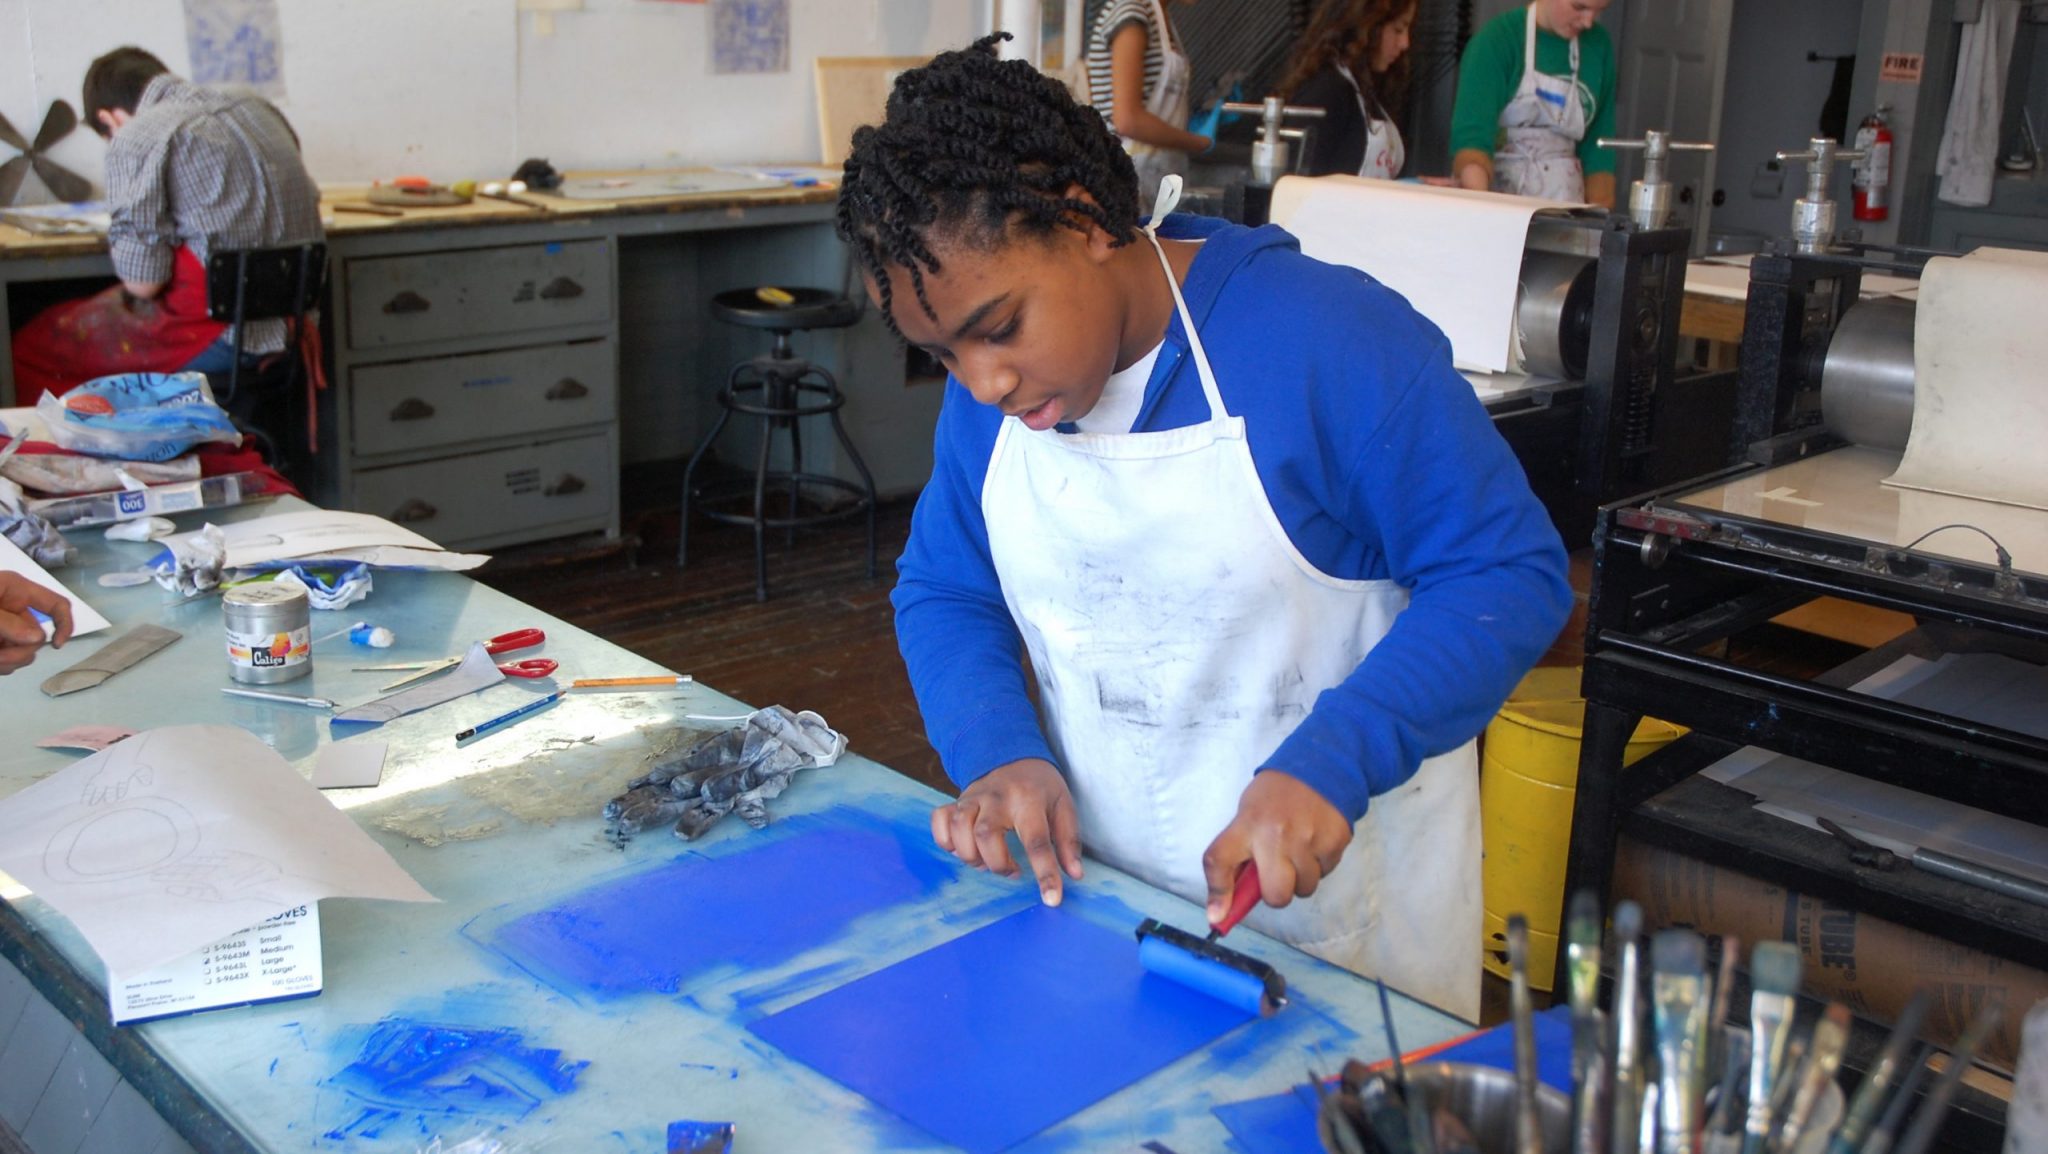 A young artist works on a block printing project in a studio.